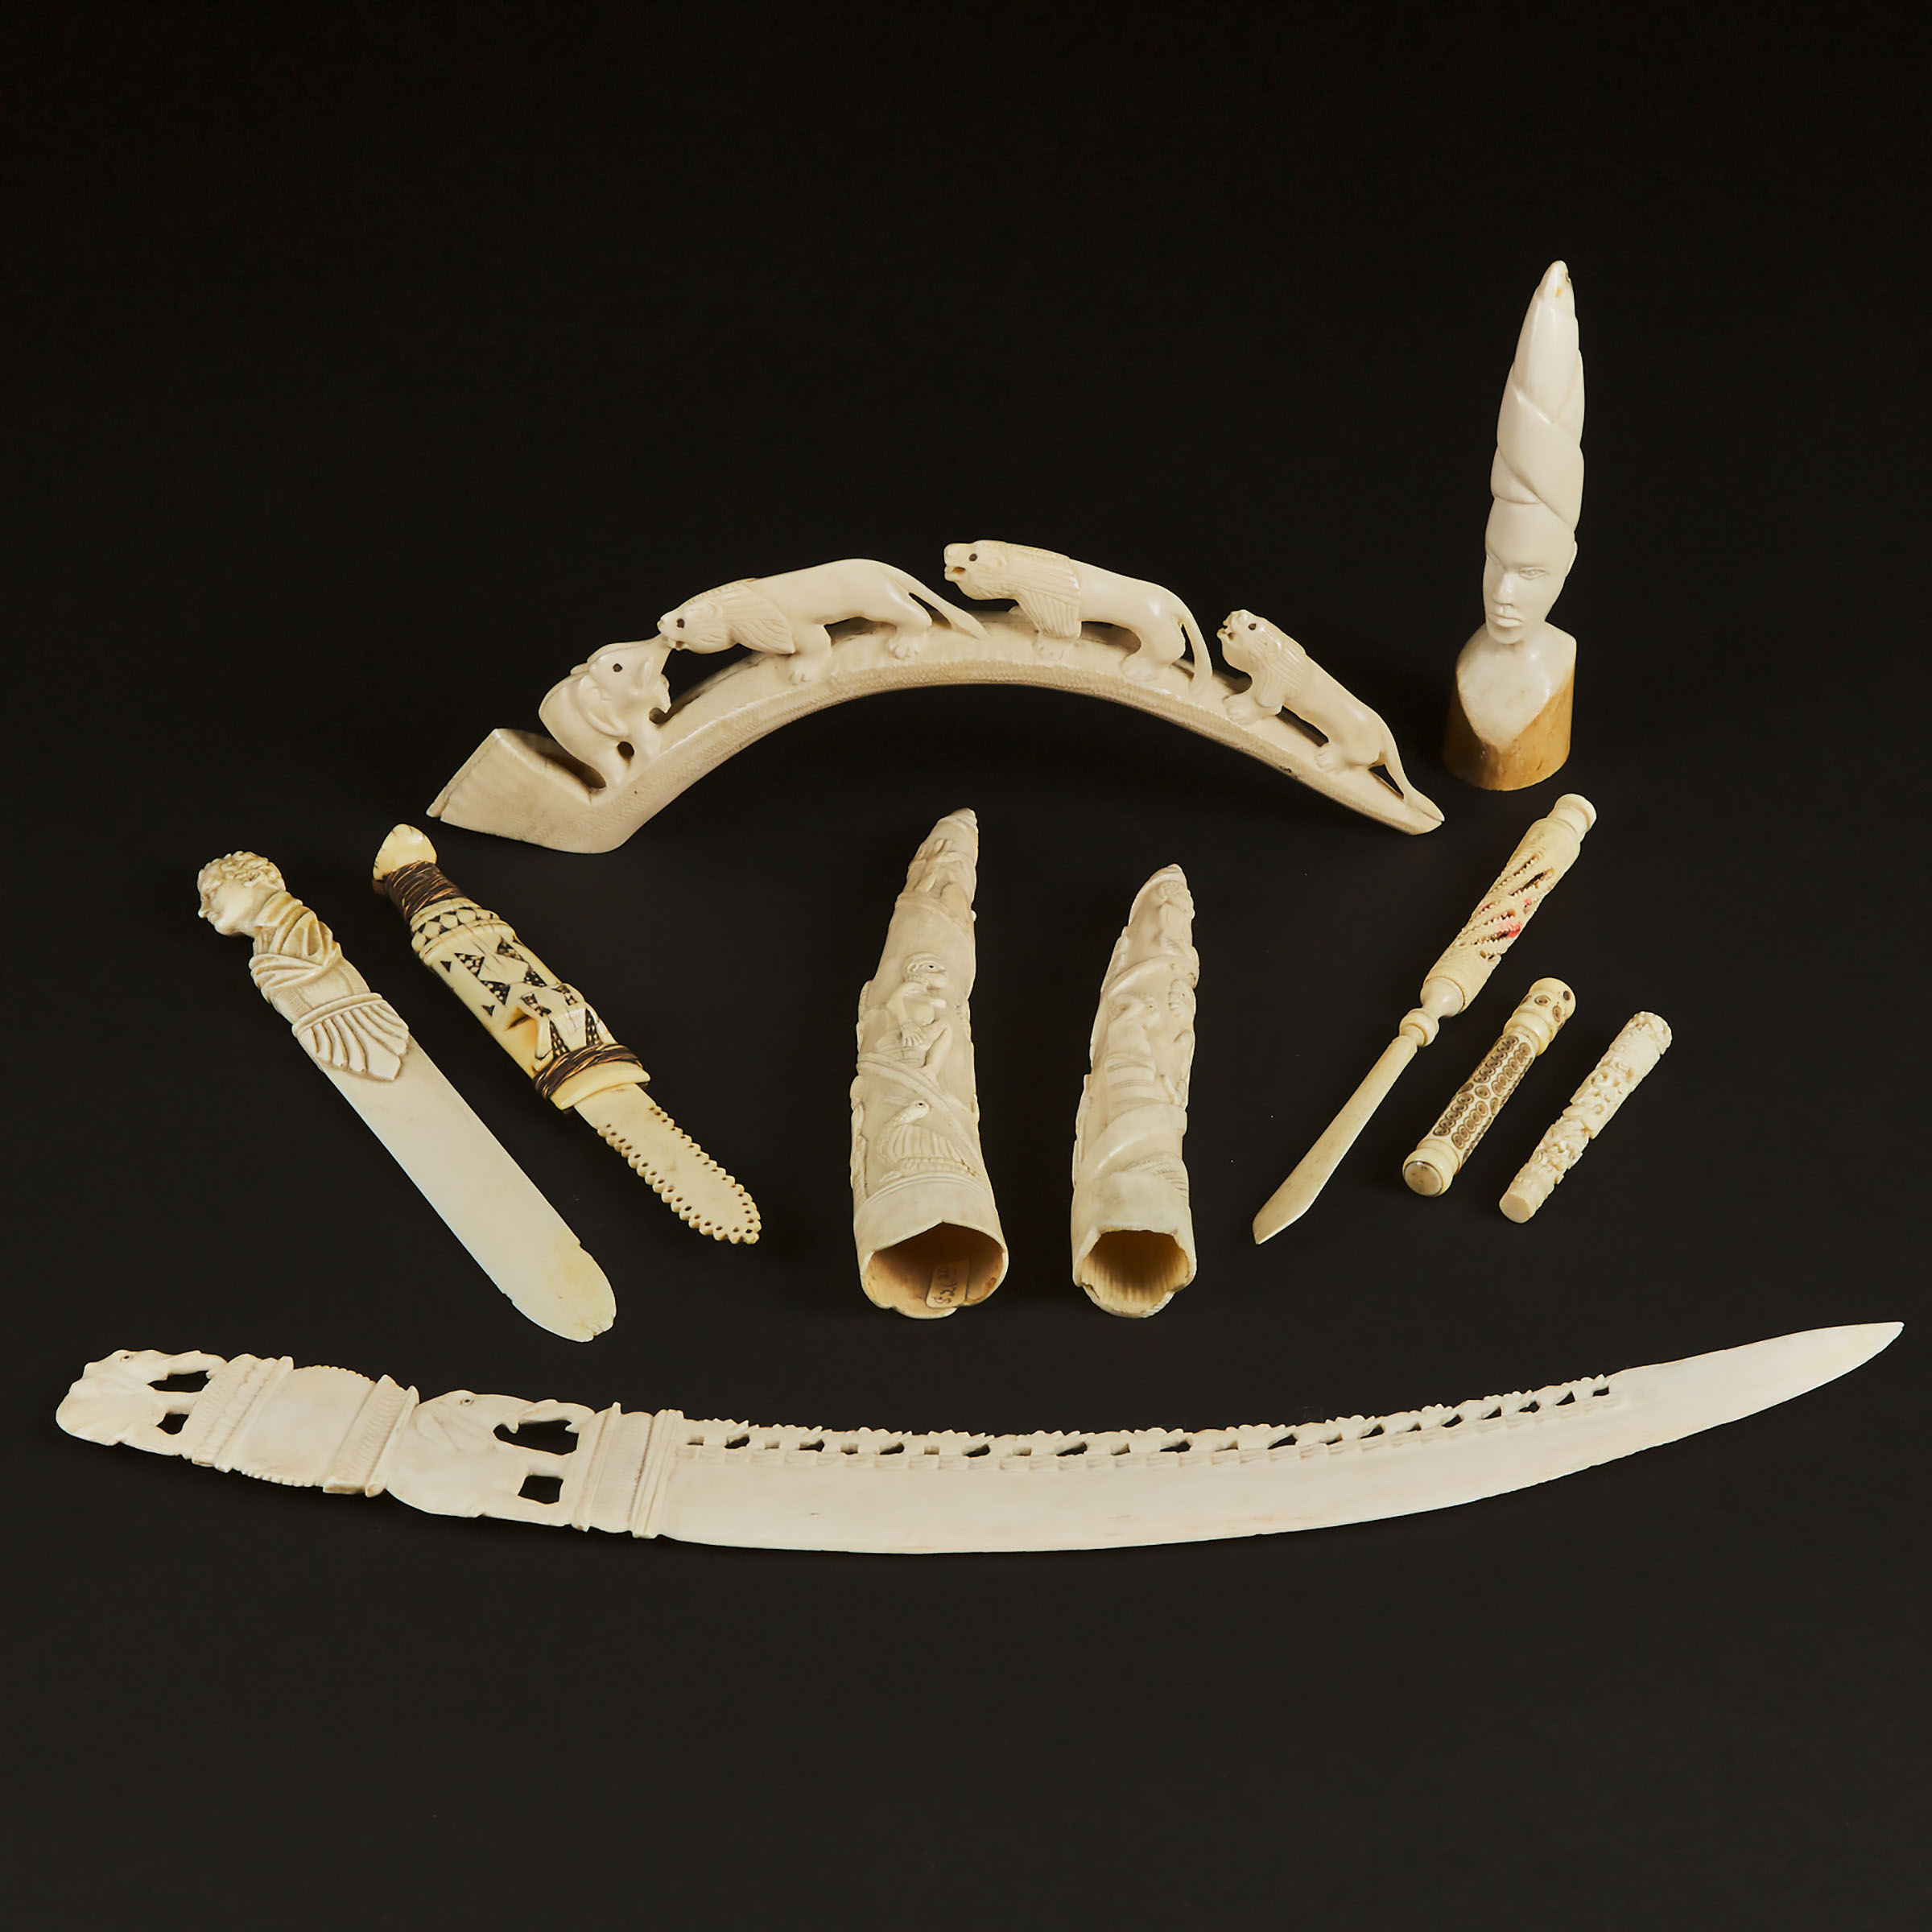 A Group of Ten Ivory and Bone Needle Cases, Letter Openers, and Tusk Carvings, Mid 20th Century